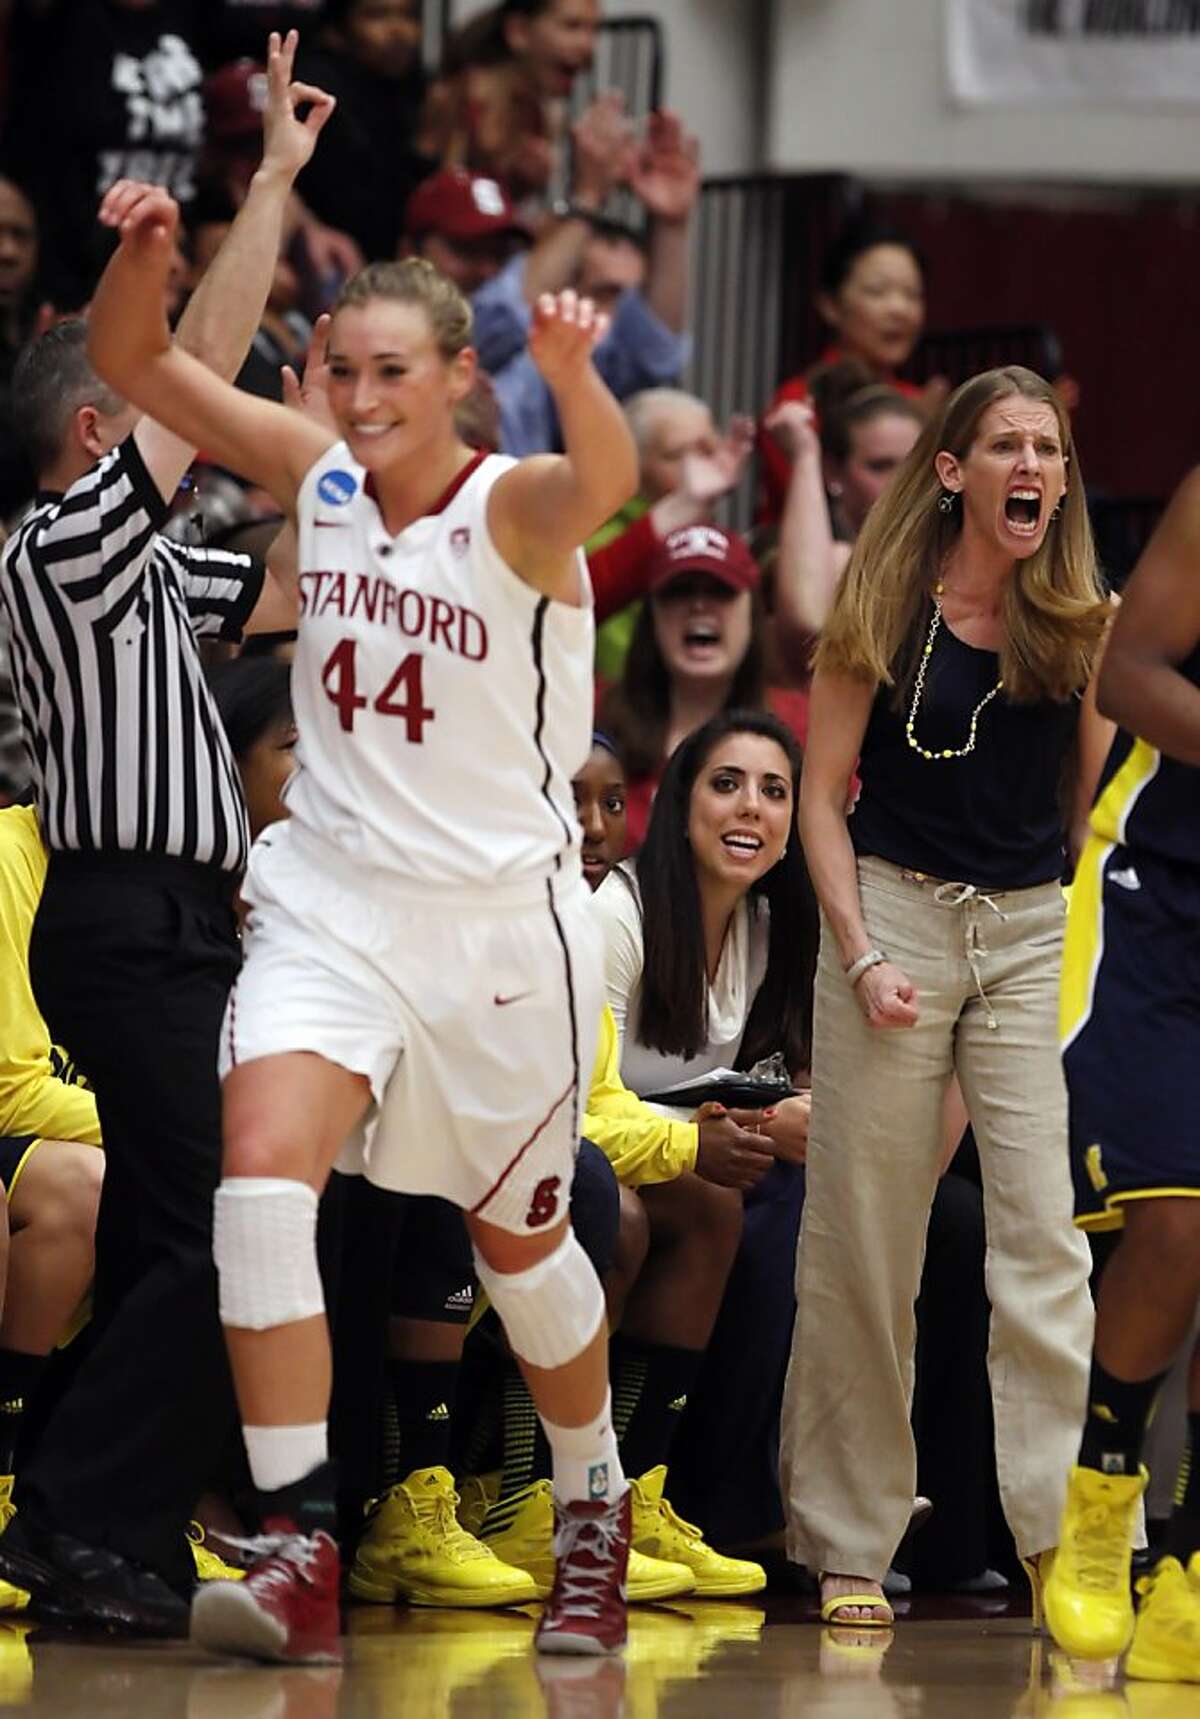 Michigan Head Coach Kim Barnes Arico reacts after Joslyn Tinkle scores a three point shot in the first half. The Stanford Cardinal played the Michigan Wolverines at Maples Pavilion in Stanford, Calif., on Tuesday, March 26, 2013.